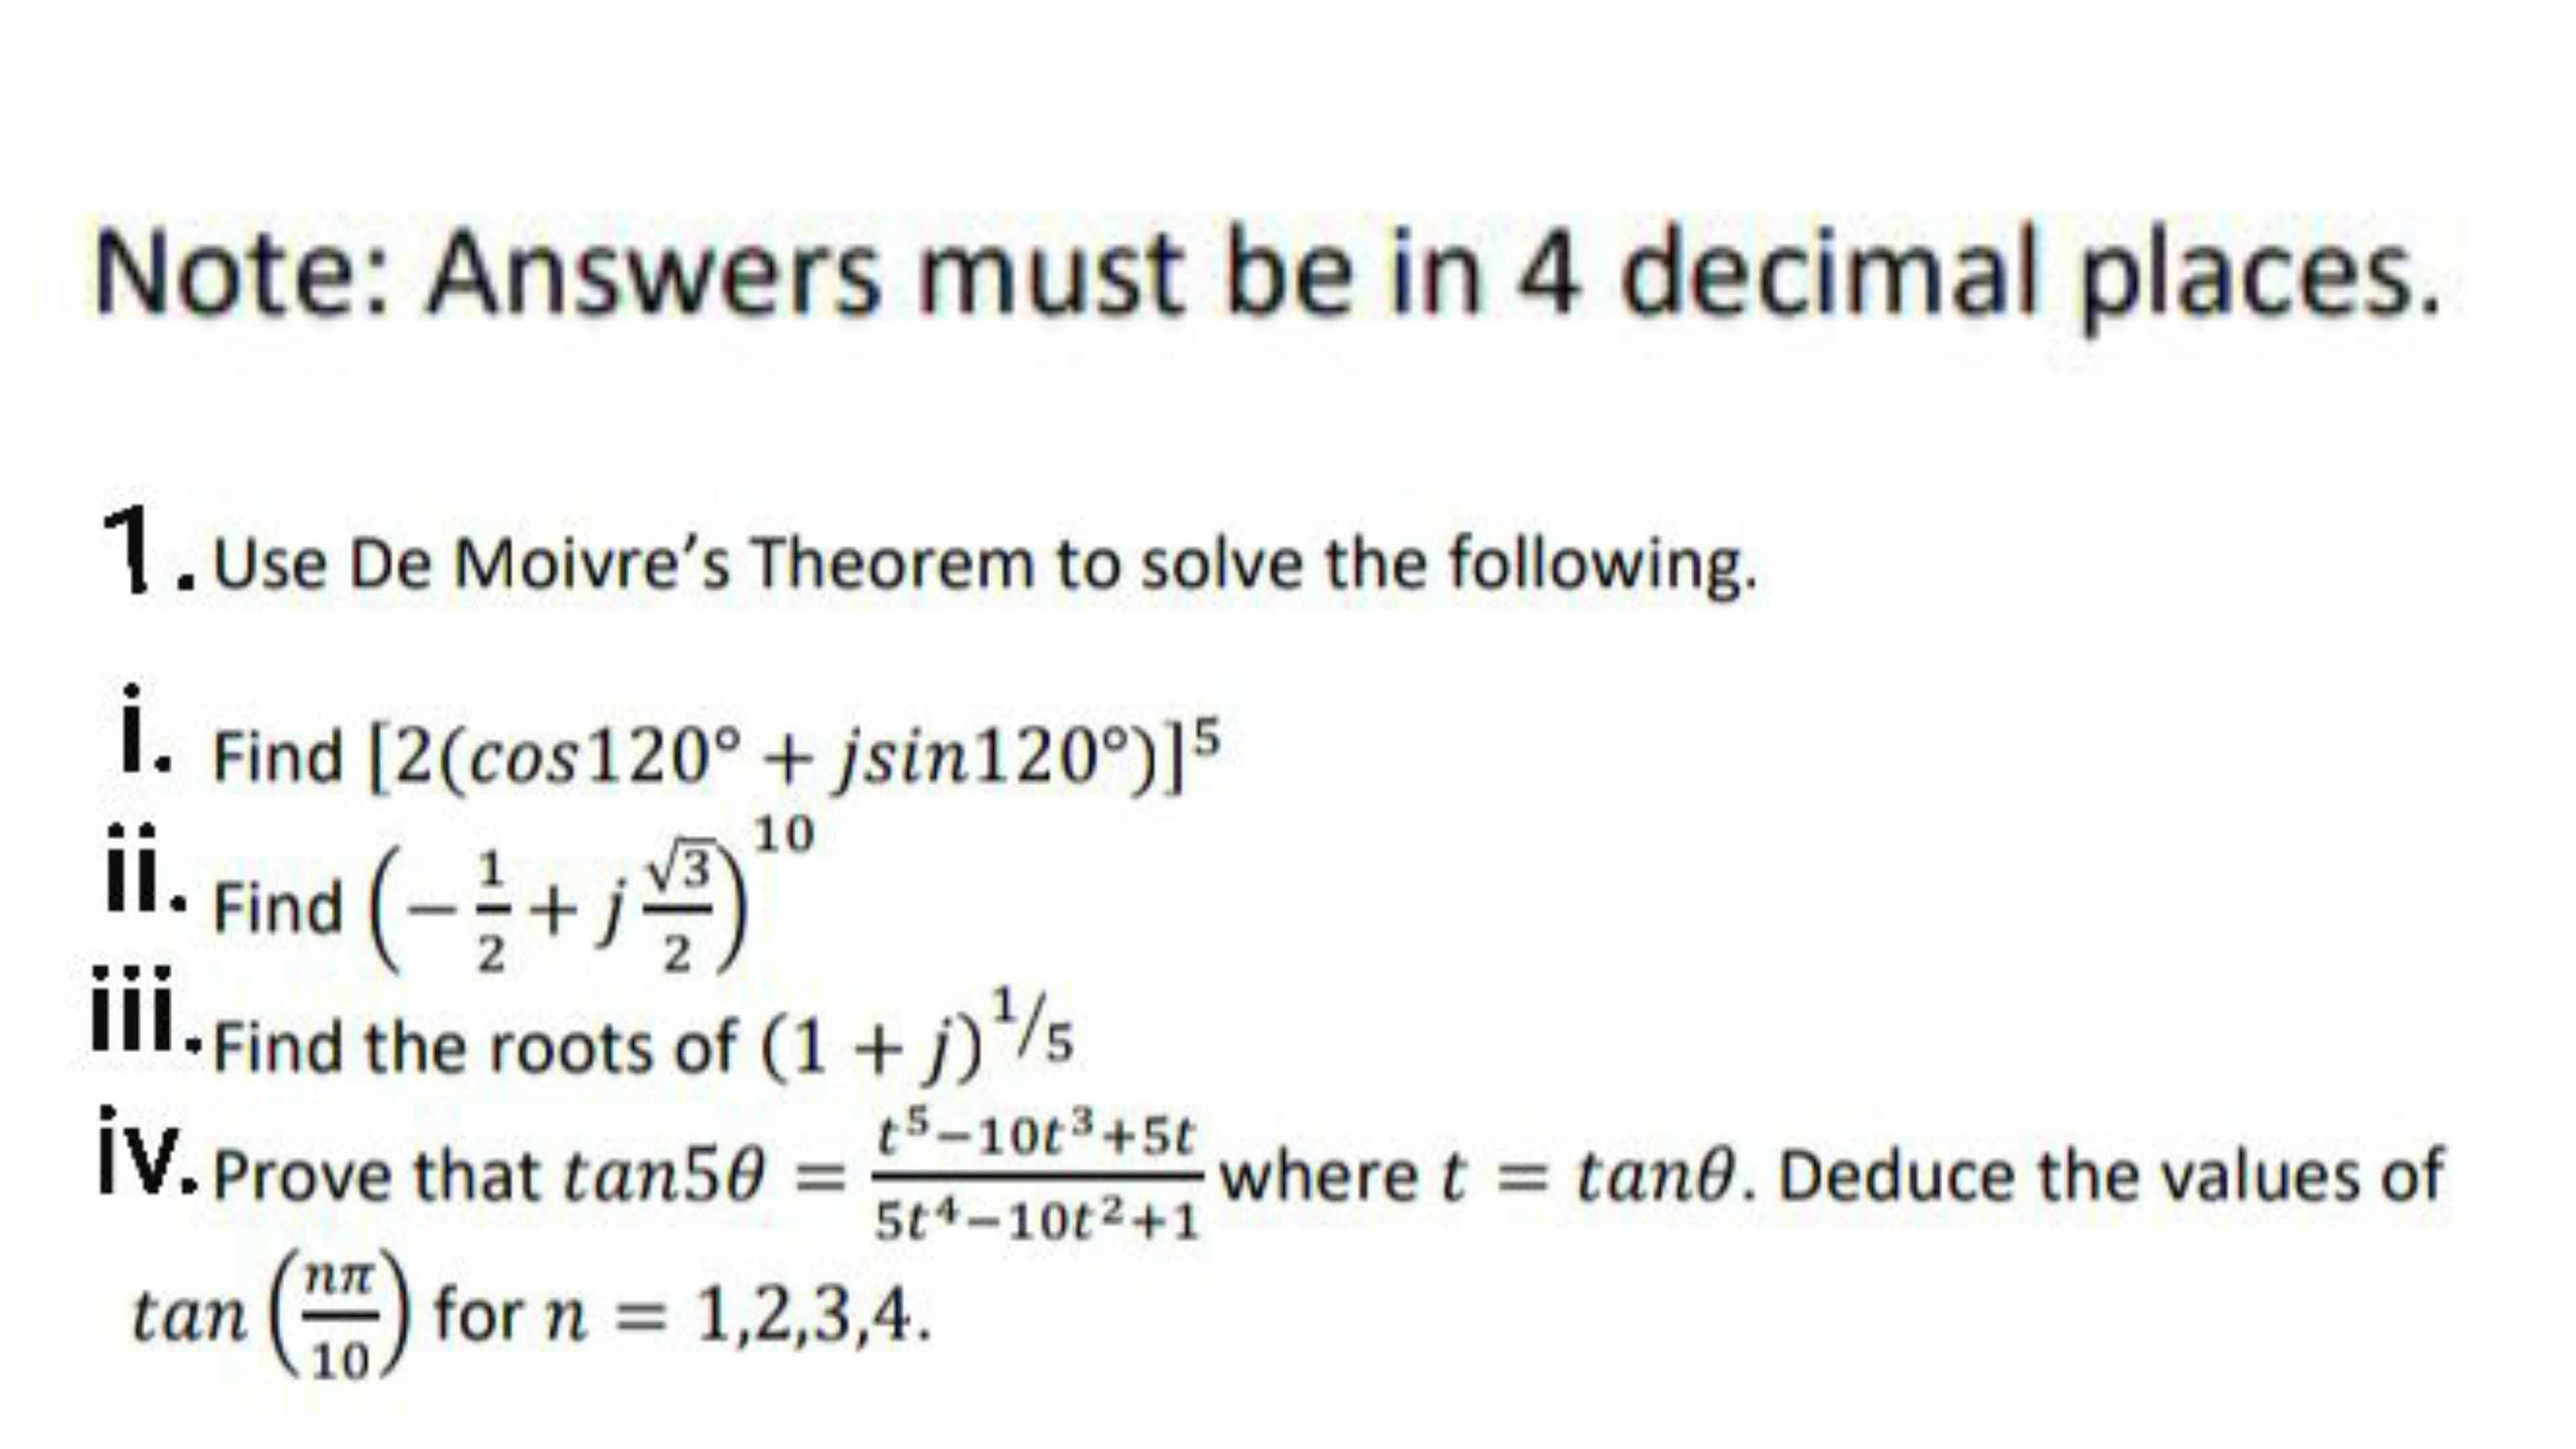 1.Use De Moivre's Theorem to solve the following.
i.
Find [2(cos120° + jsin120°)]5
ii. Find (-;+j
ii.p
10
II
• Find the roots of (1 + j)/5
t5-10t3+5t
iV. Prove that tan50
where t = tan0. Deduce the values of
5t4-10t2+1
nn
tan () for n = 1,2,3,4.
